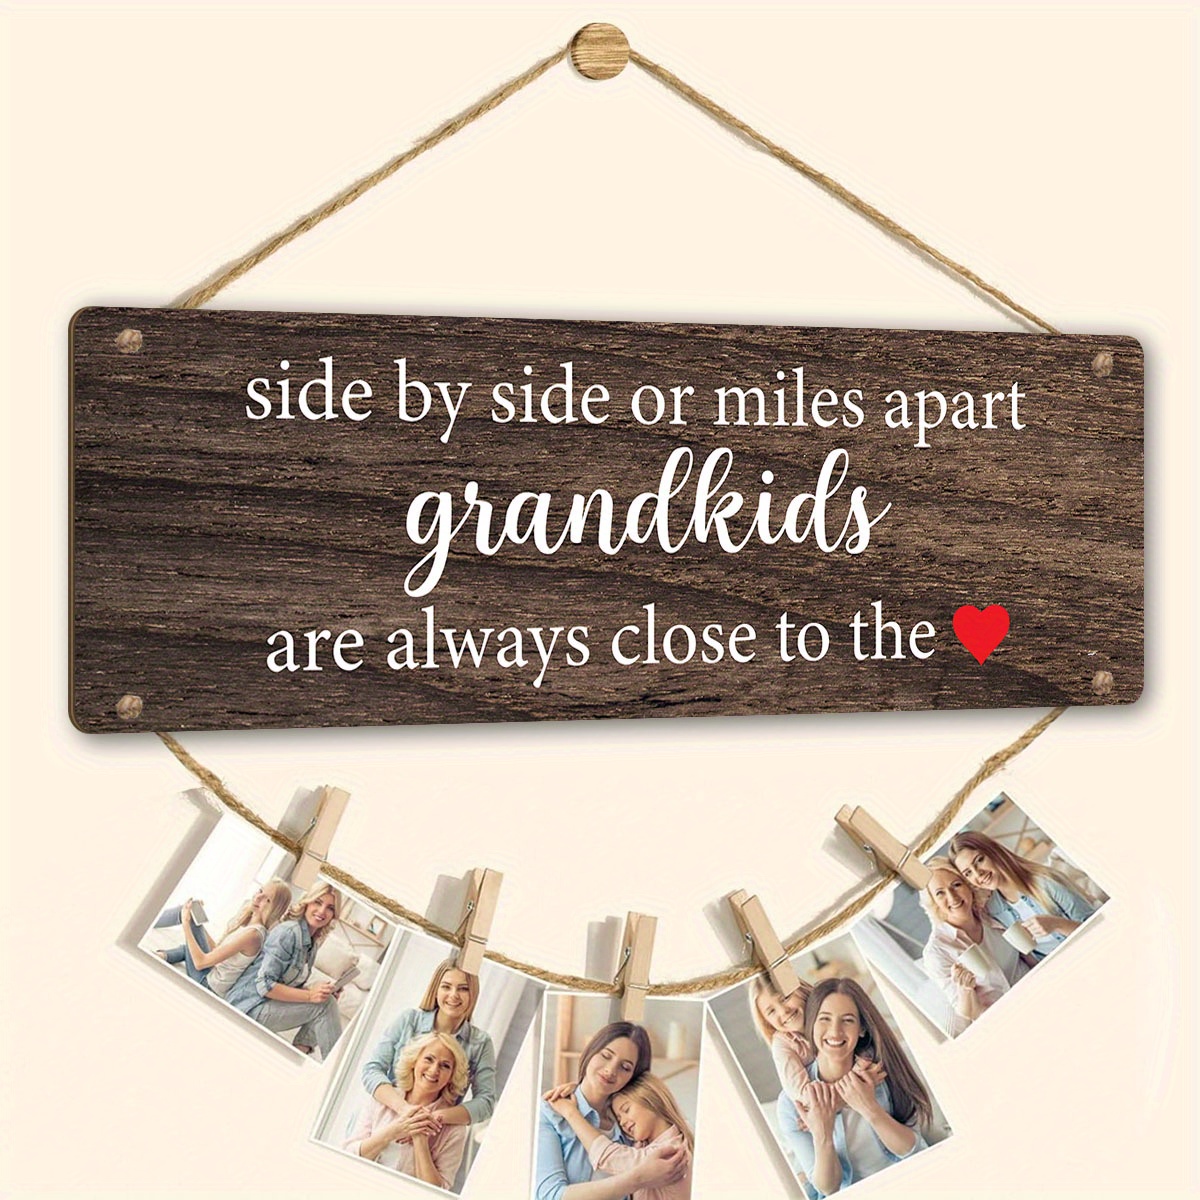 

Grandkids Photo Wall Sign Set - Perfect Grandma & Grandpa Gift From Grandchildren, Side By Side Or Theme, Faux Wood Hanging Decor For Home, Ideal Birthday Present For Grandparents